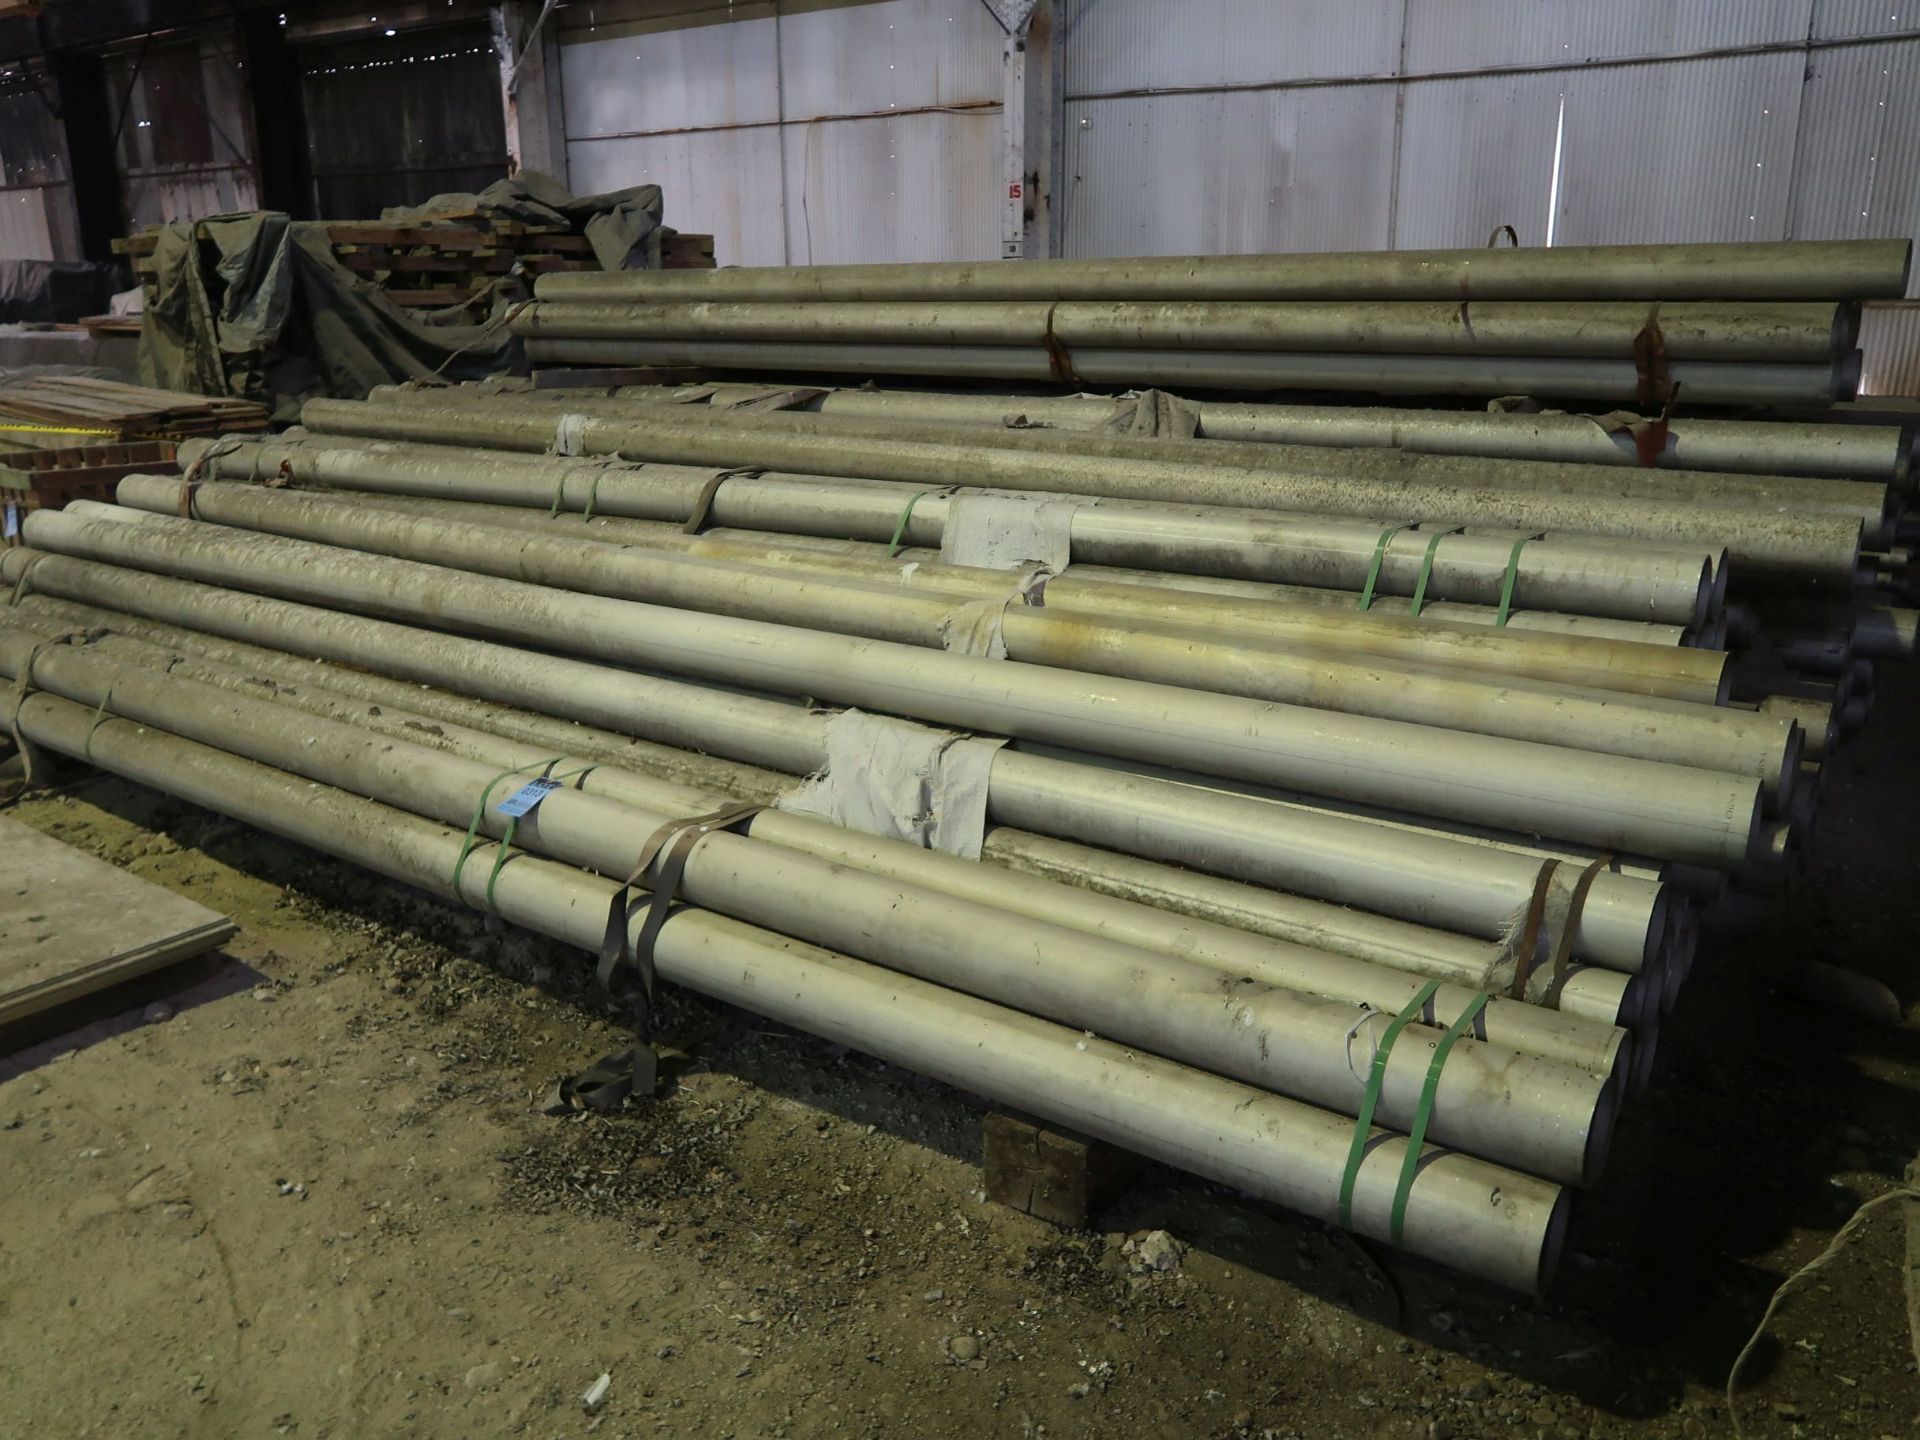 LARGE QUANTITY STAINLESS STEEL MATERIAL INCLUDING 6" DIAMETER X 20' LONG PIPE, 3" PIPE, ASSORTED